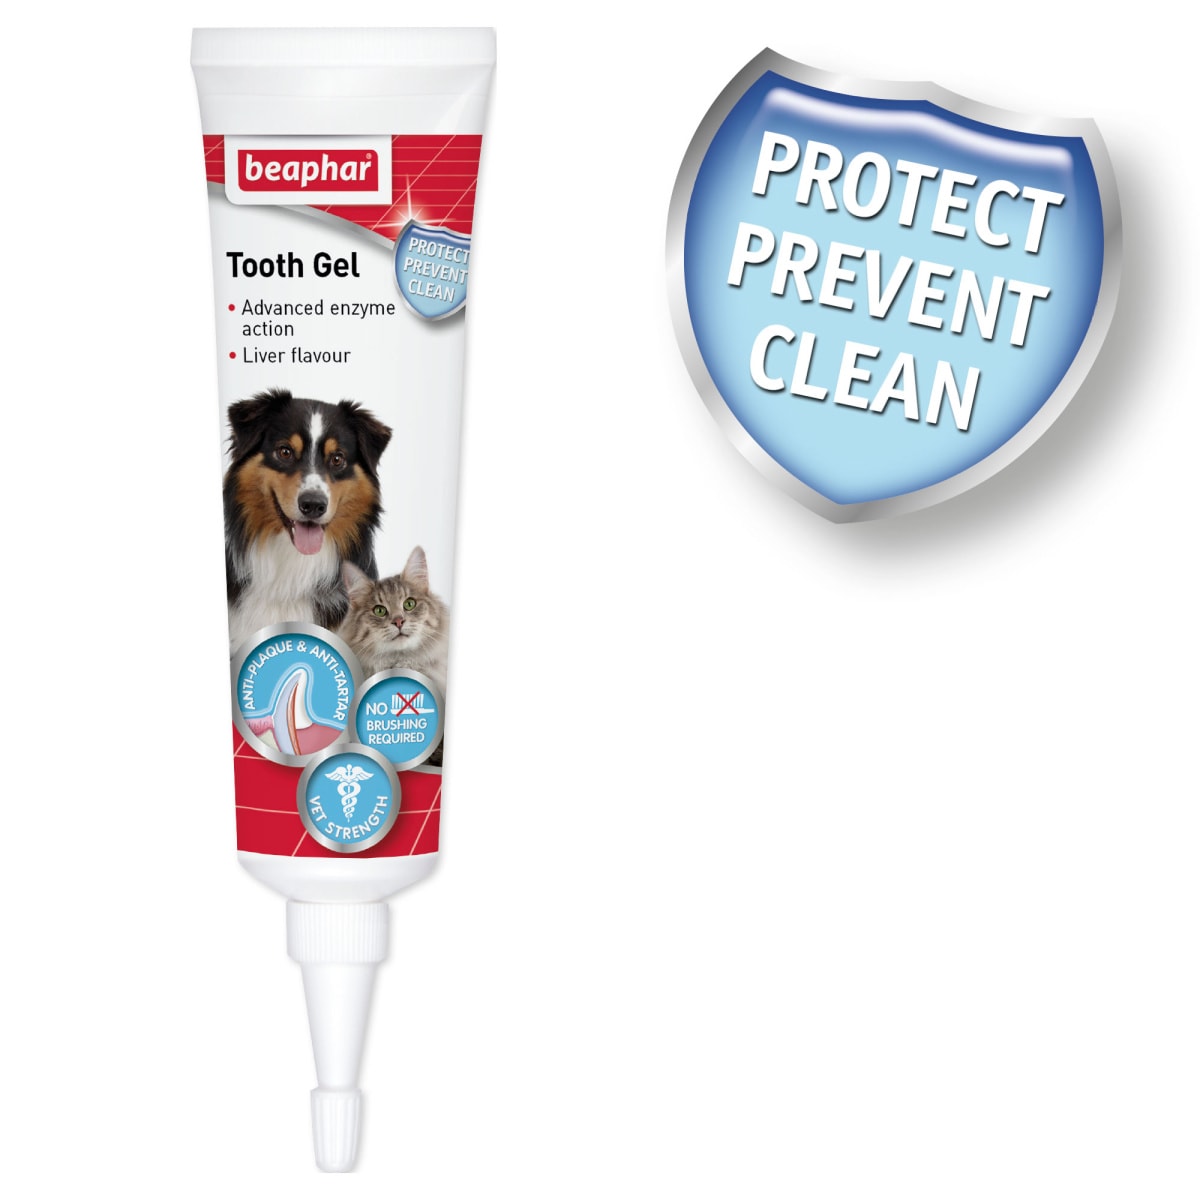 Beaphar Liver Flavoured Tooth Gel for Cats & Dogs 100g Main Image